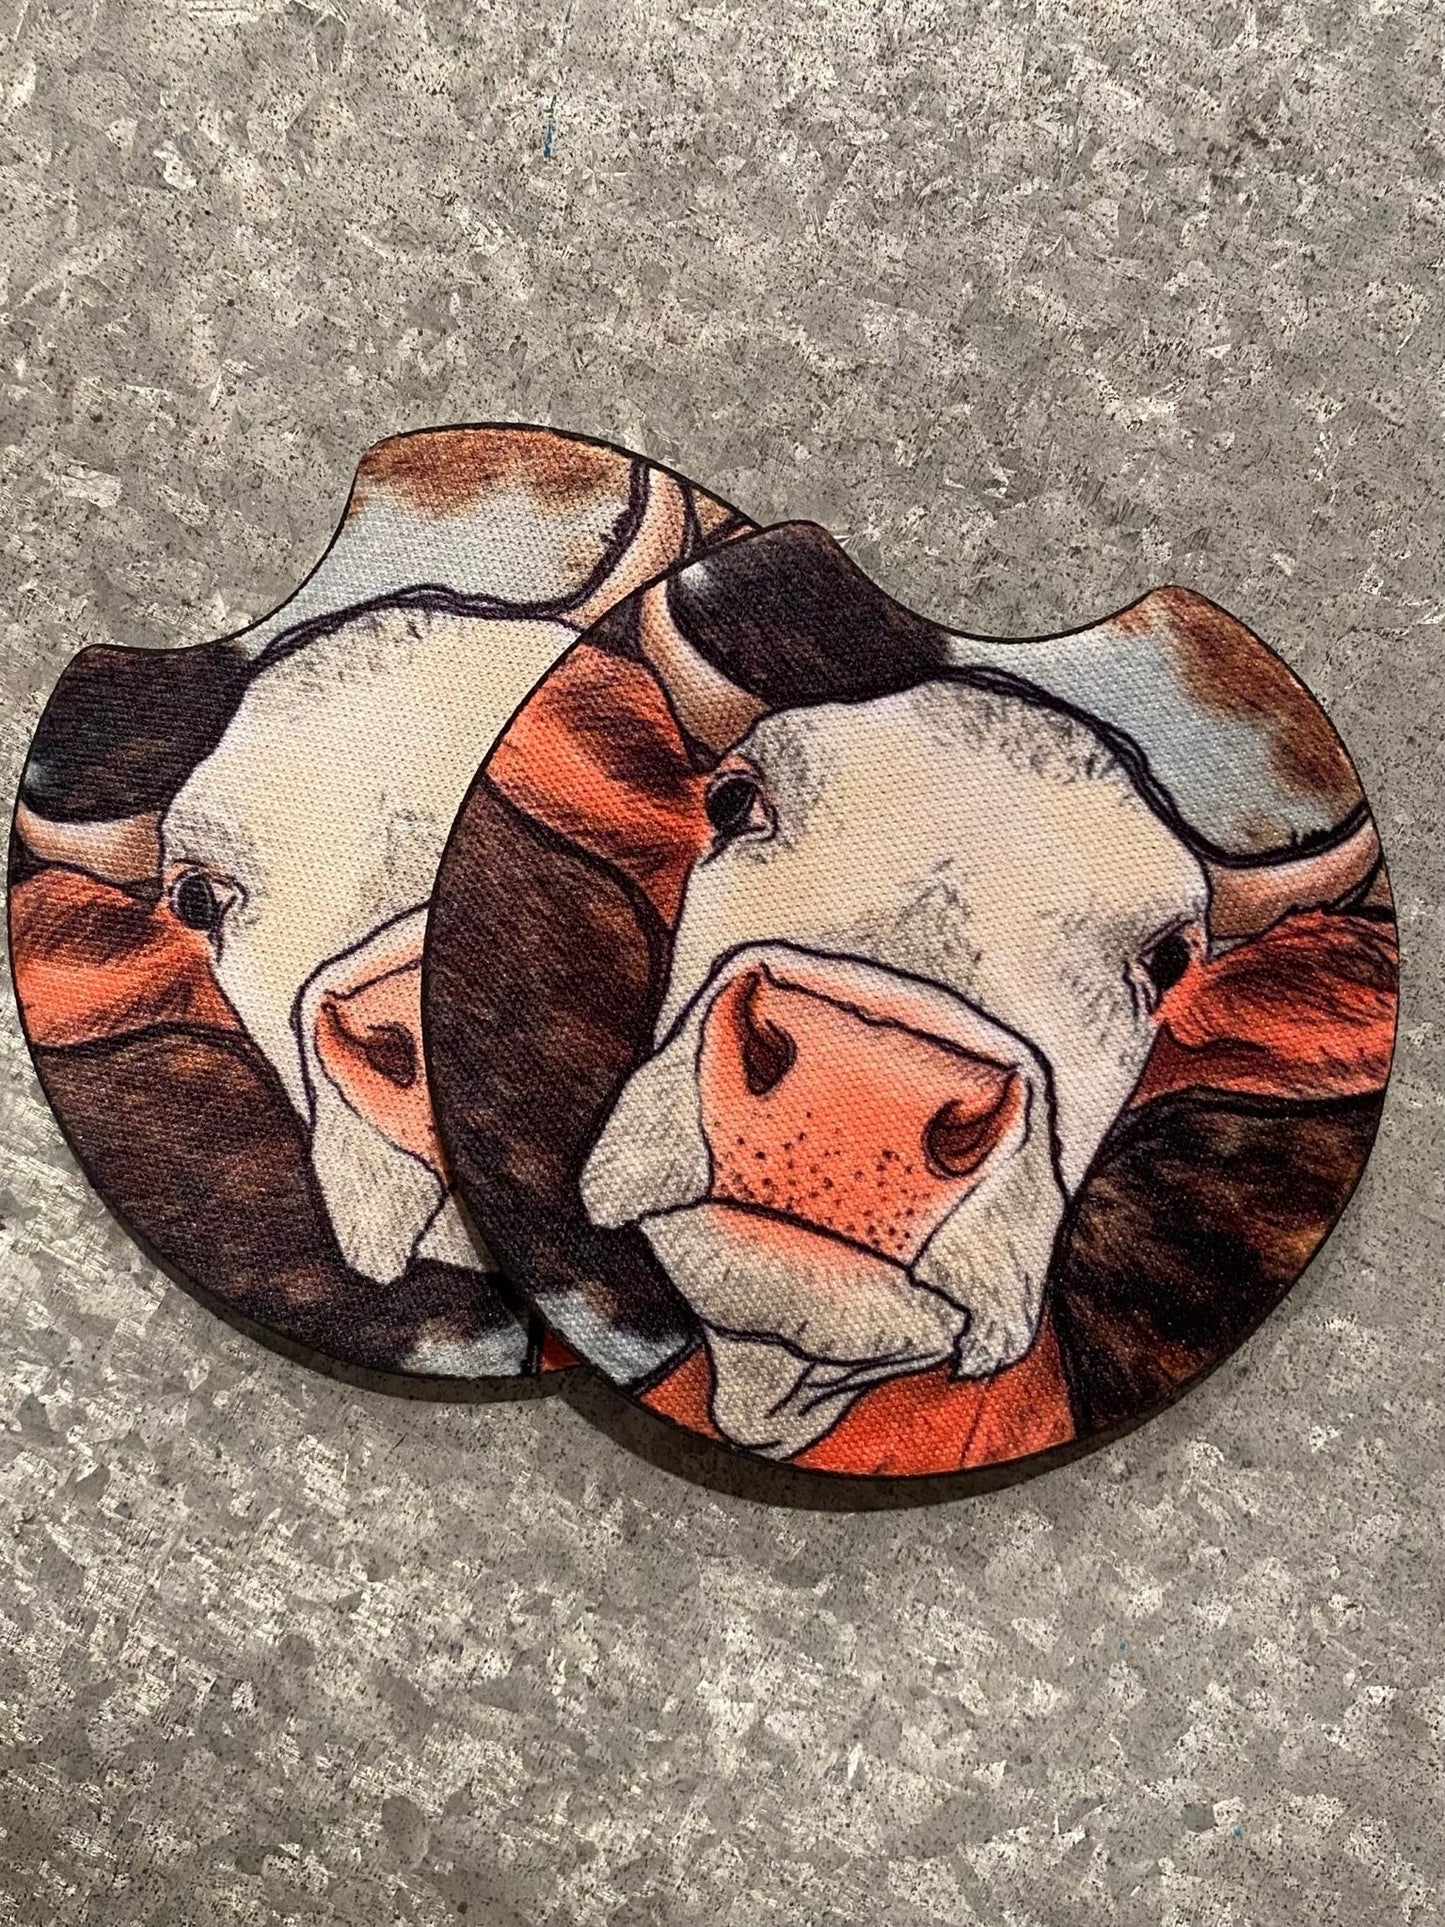 CAR CUP HOLDER COASTERS - CountryFide Custom Accessories and Outdoors